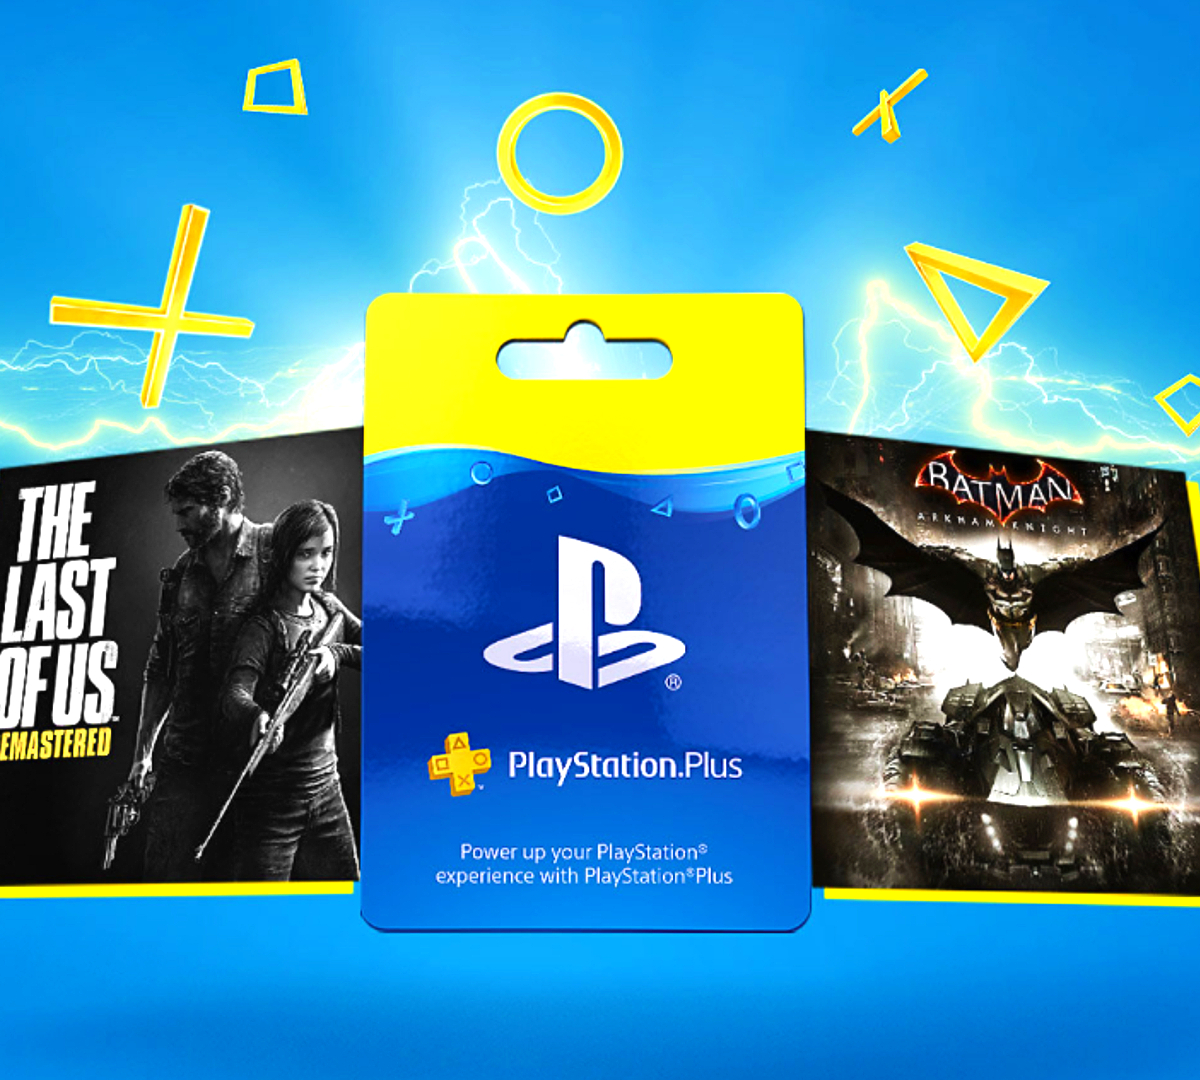 PlayStation Plus membership cards make for great Christmas gift ideas for gamers.